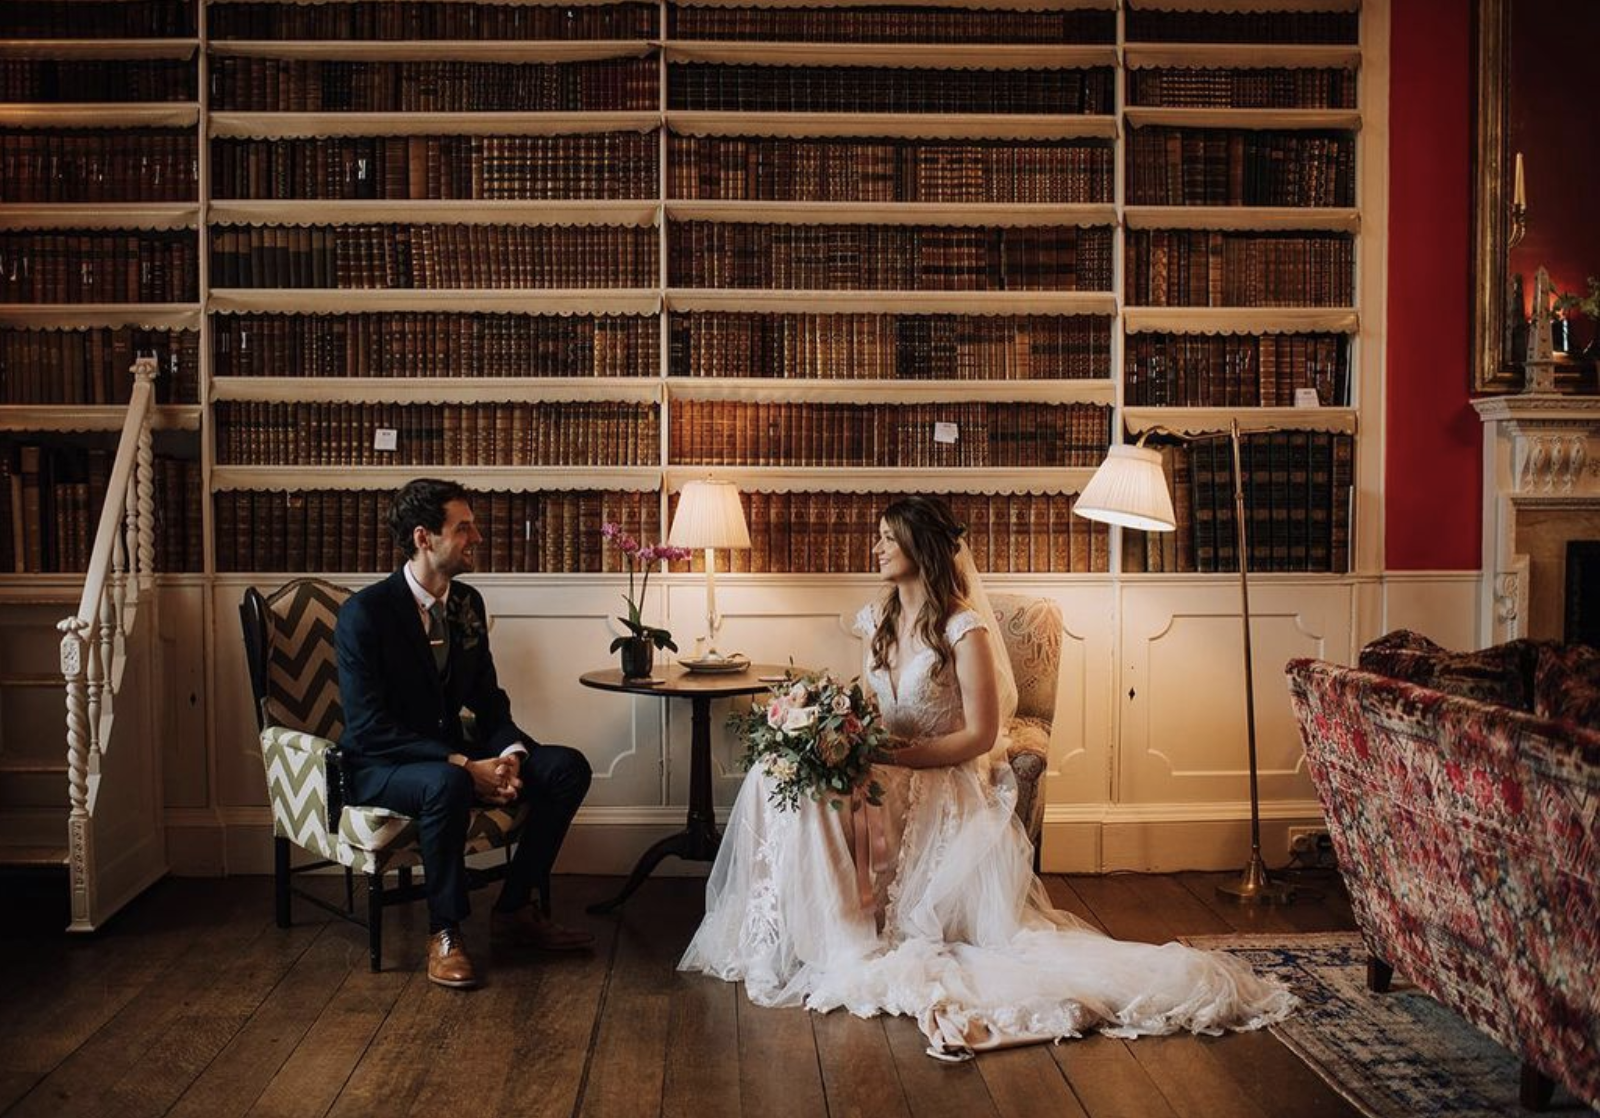 Bridea nd groom in the library at Iscoyd